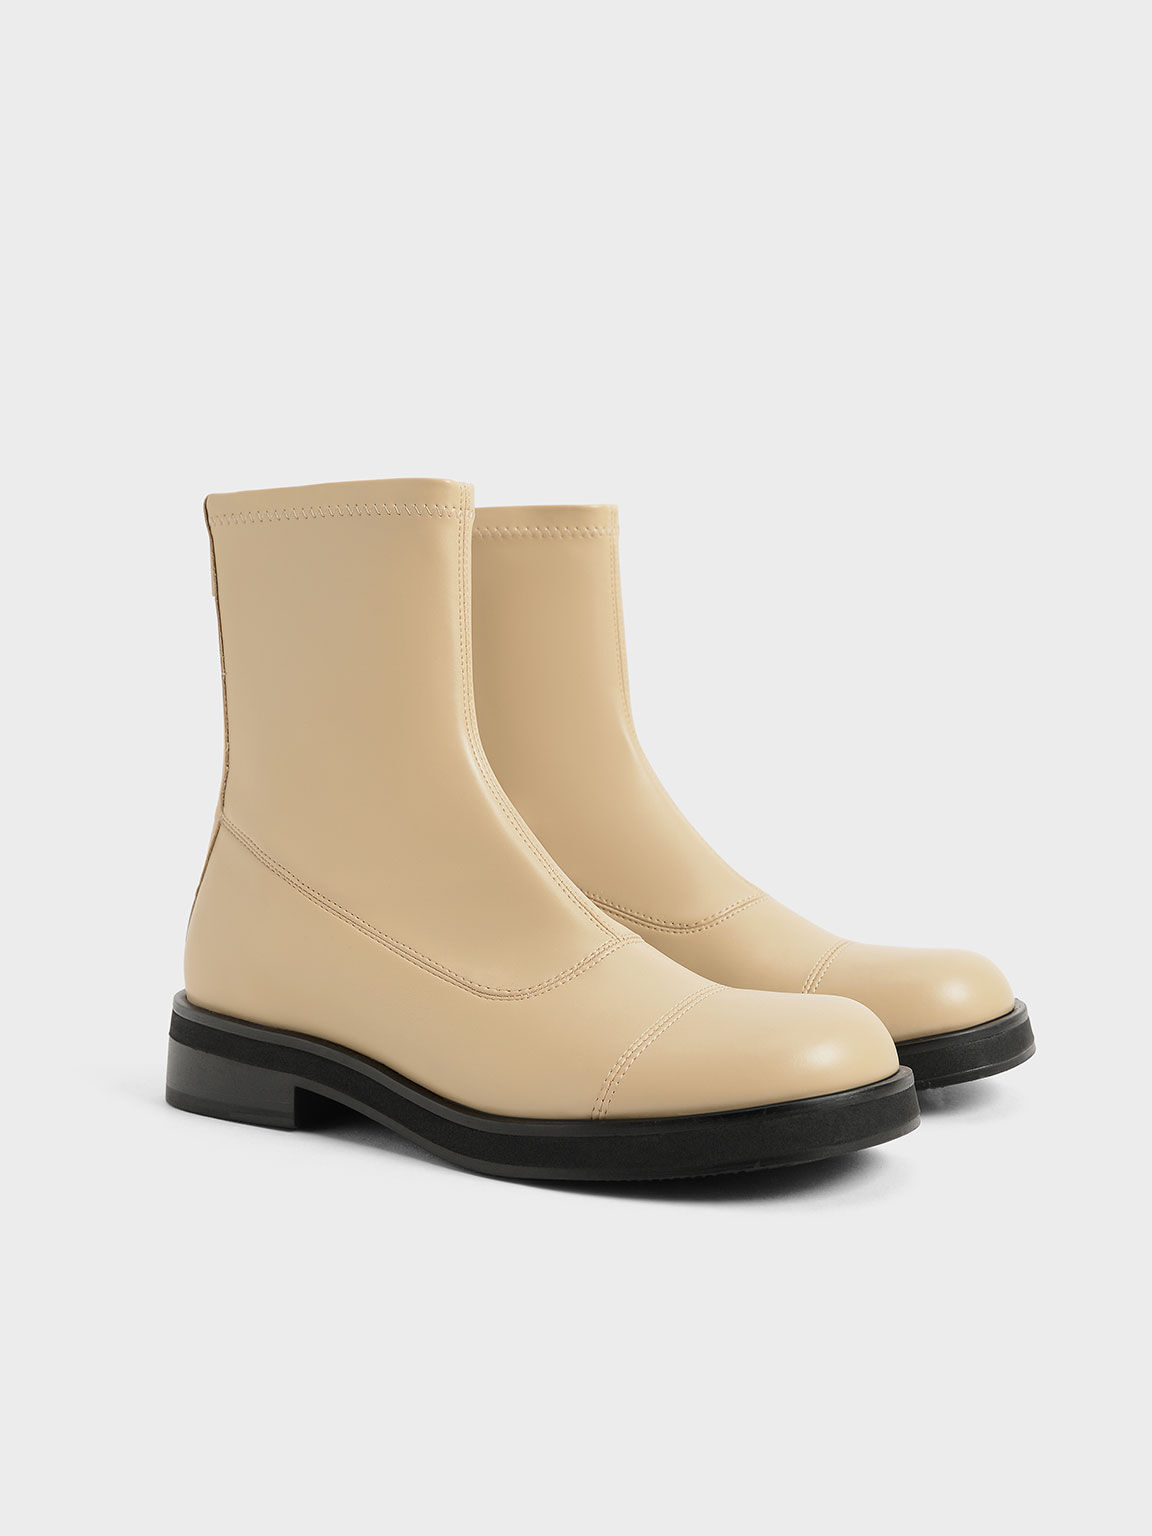 Sand Round Toe Zip-Up Ankle Boots - CHARLES & KEITH US